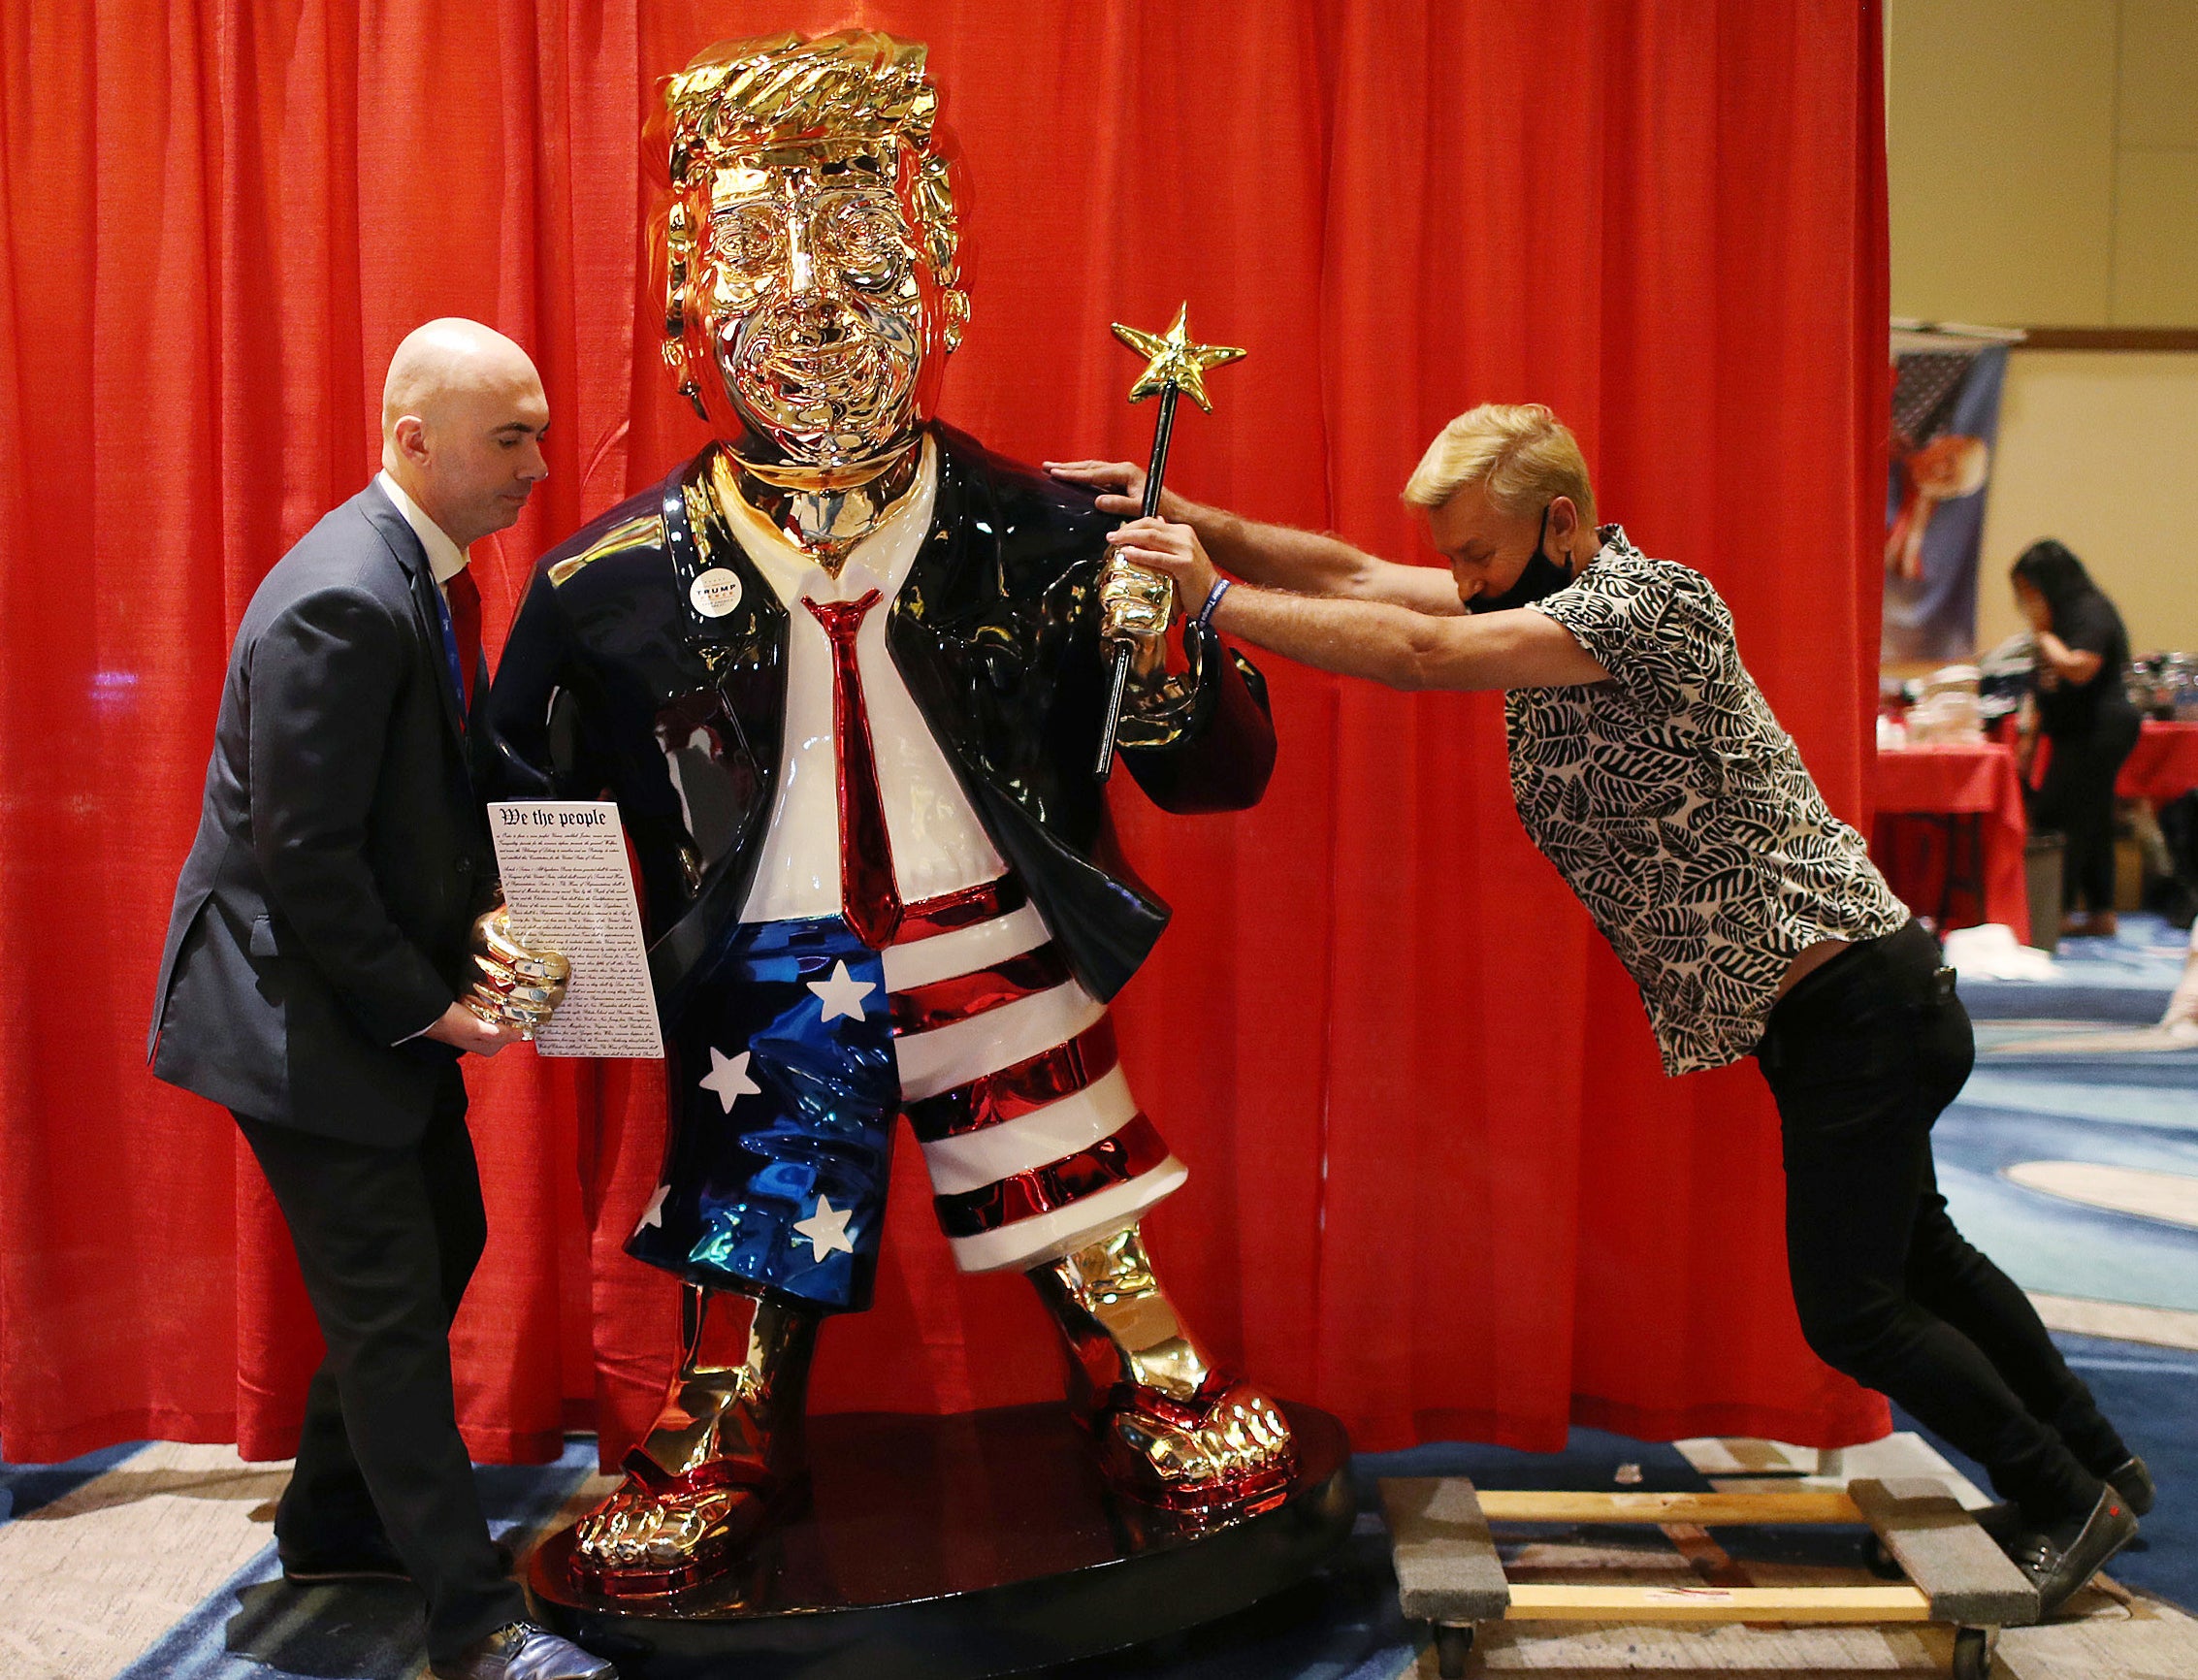 Two men stand on either side of a gold-plated statue resembling Trump, wearing American flag shorts, a suit, and tie, and carrying a wand with a star on the end